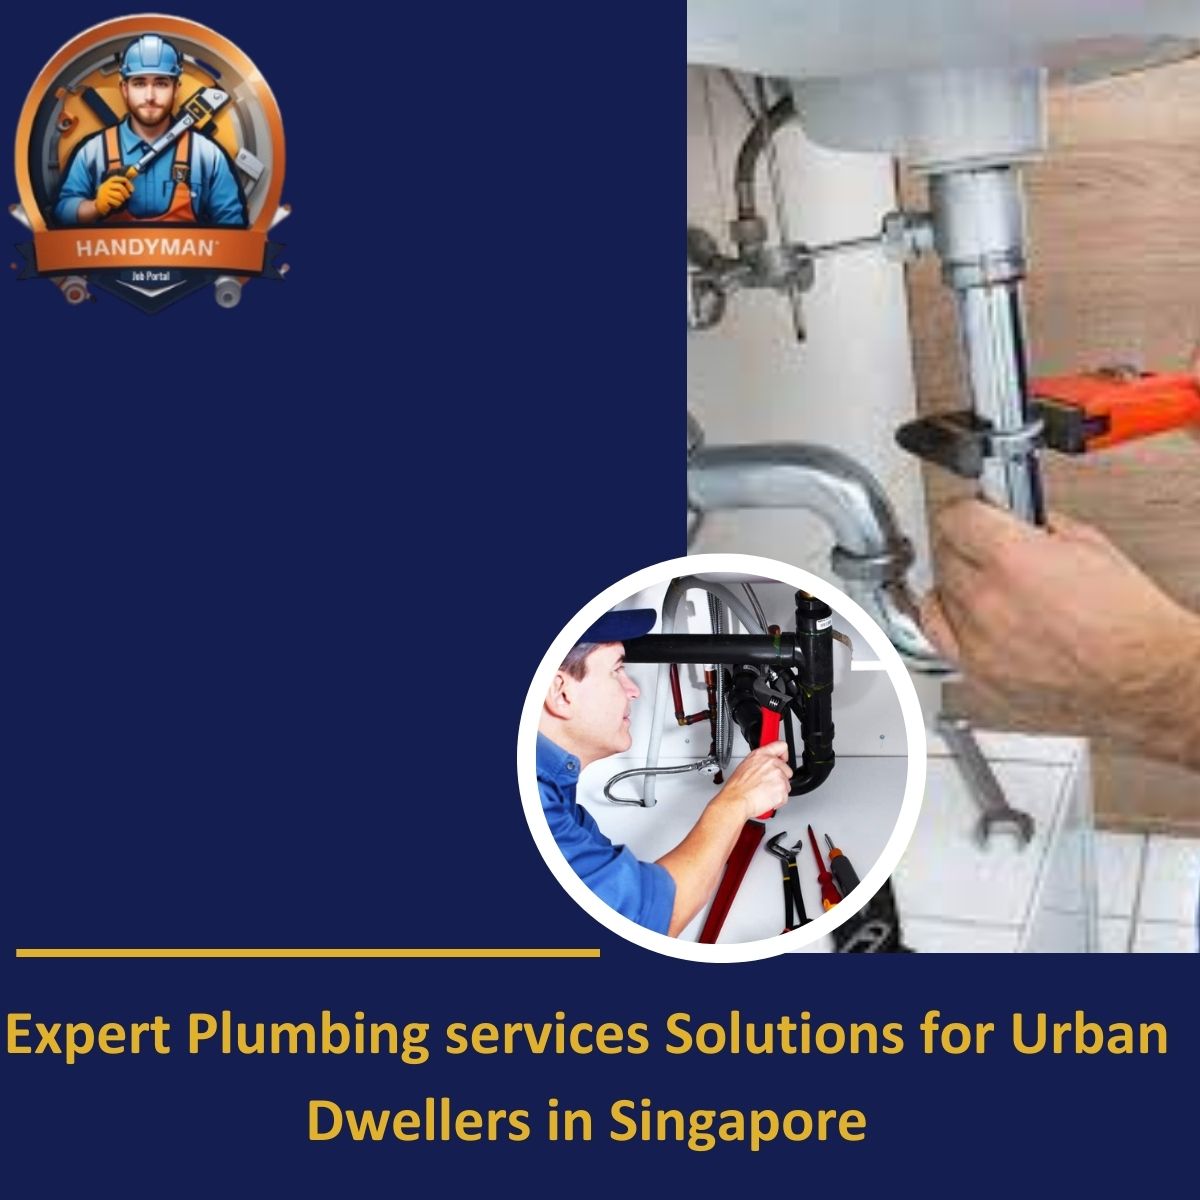 expert-plumbing-services-solutions-for-urban-dwellers-in-singapore